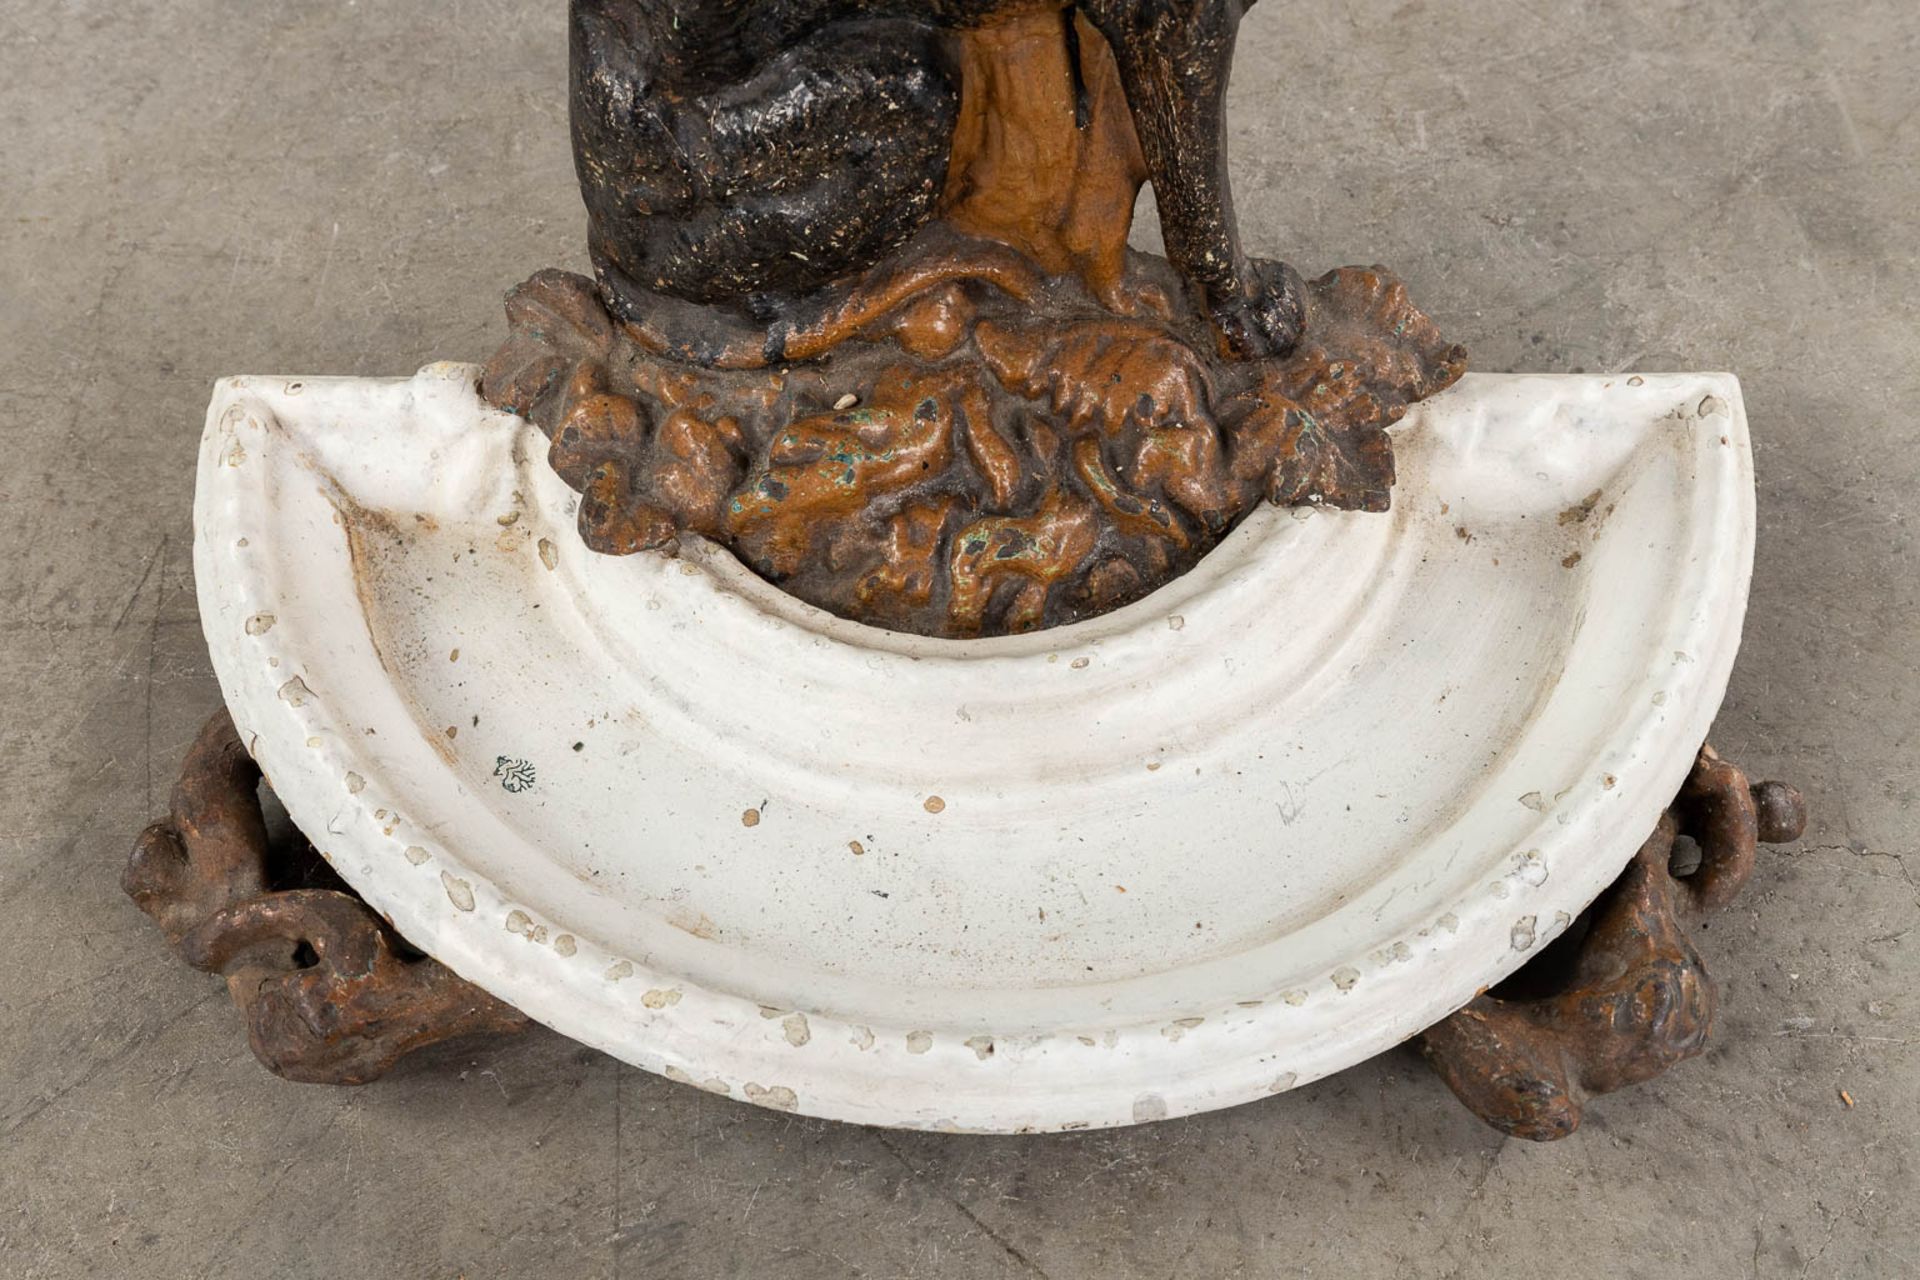 An umbrella stand, cast iron with a figurine of a dog. Circa 1900. (L: 23 x W: 44 x H: 72 cm) - Image 9 of 10